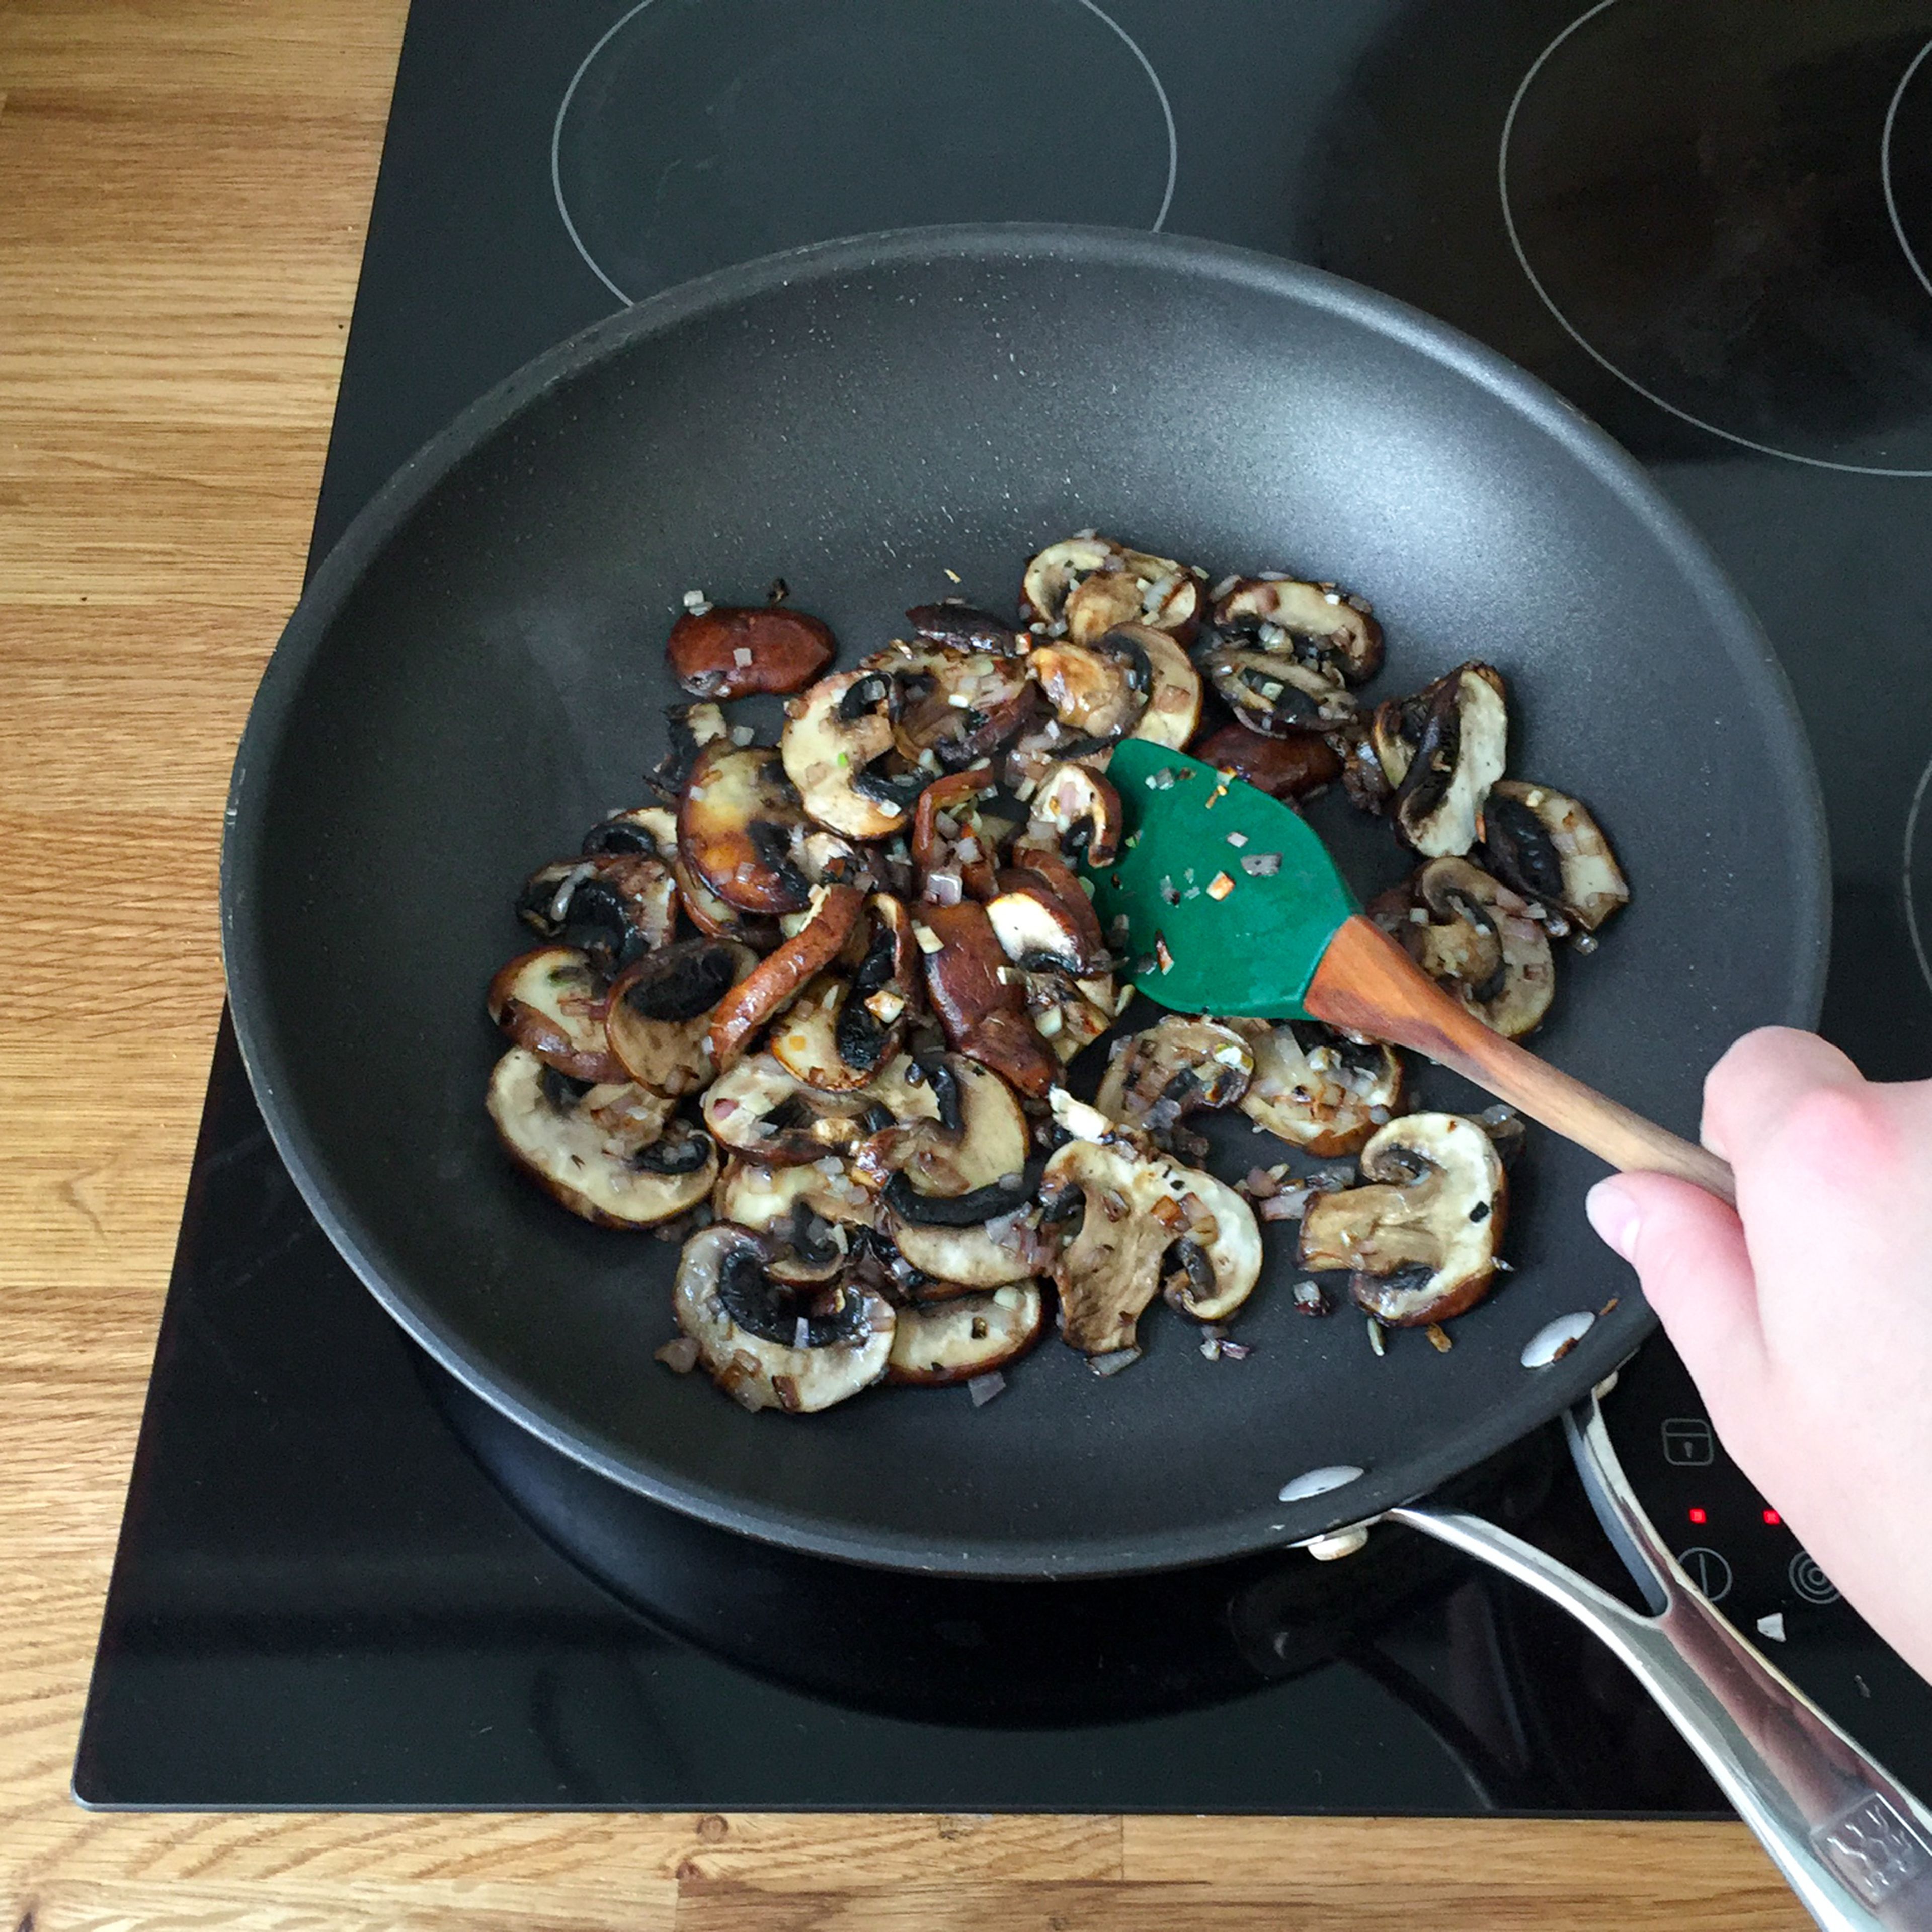 Heat vegetable oil in a frying pan, then add onions and garlic and fry until translucent. Add mushrooms and sauté for approx. 3 min. Add spinach and cook until wilted.